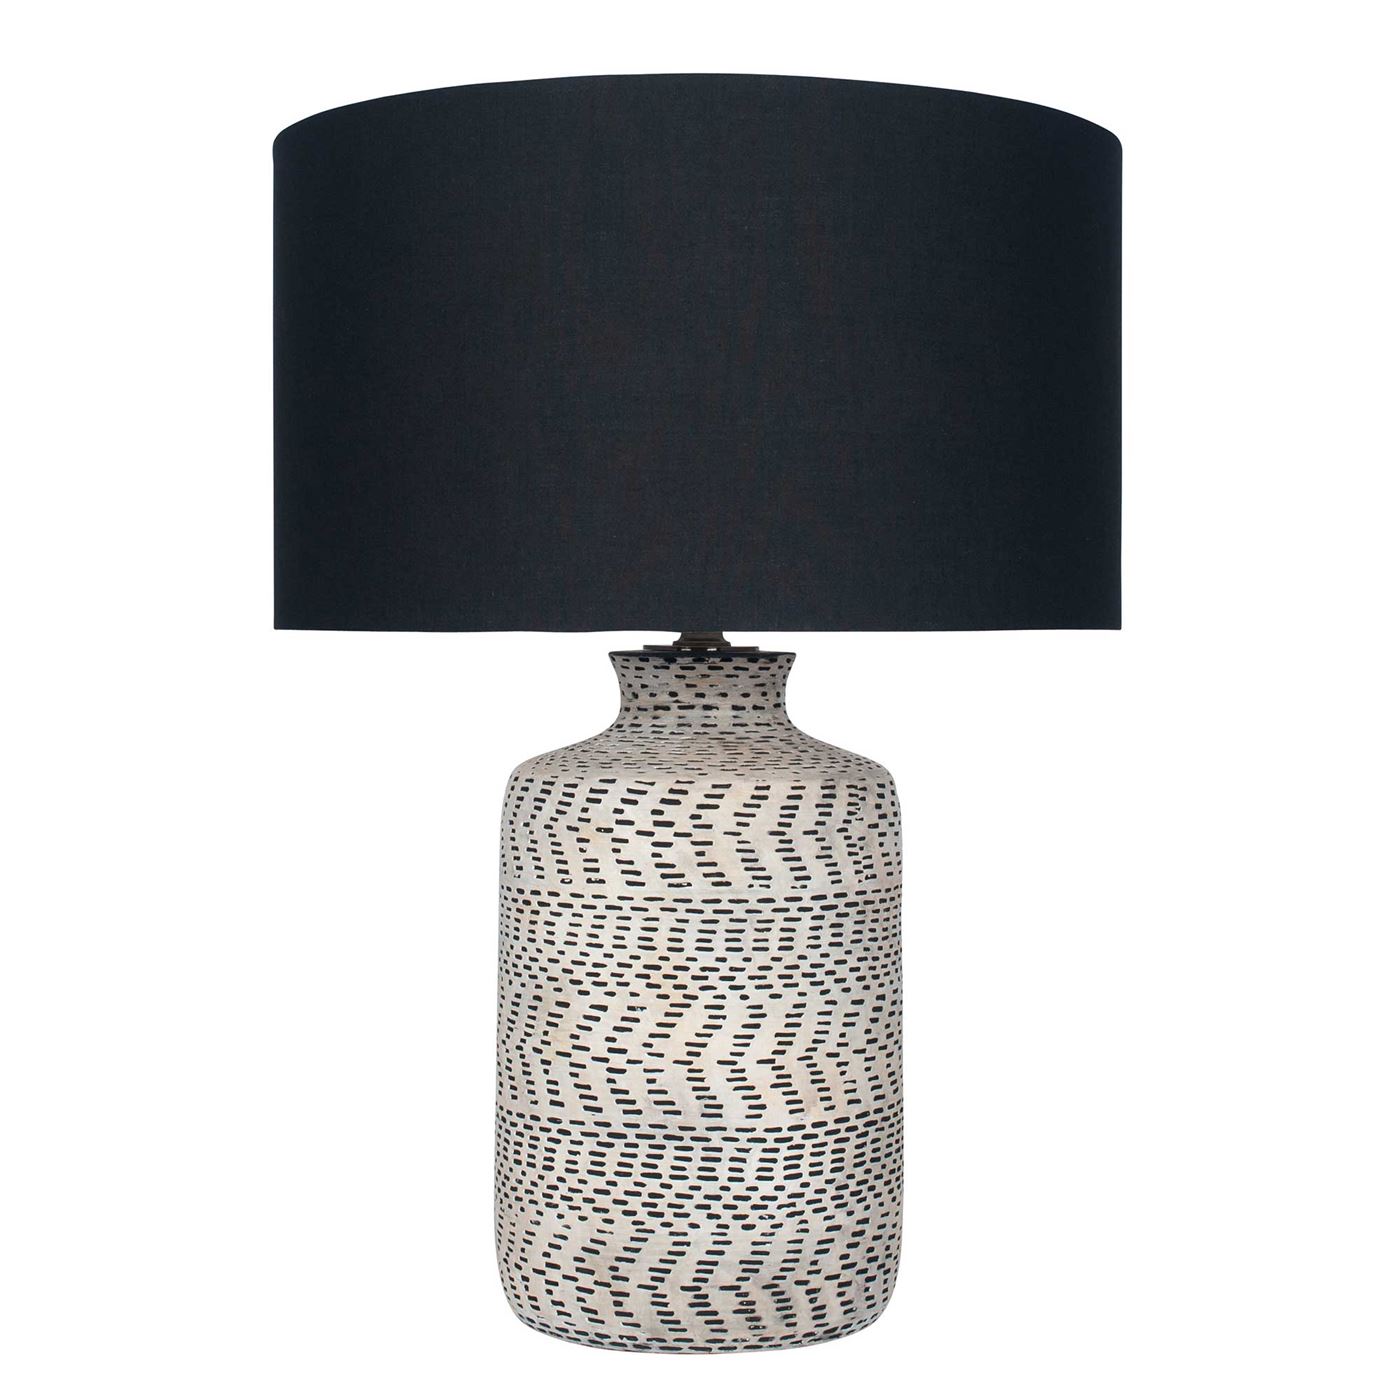 Natural & Black Textured Table Lamp, Neutral | Barker & Stonehouse